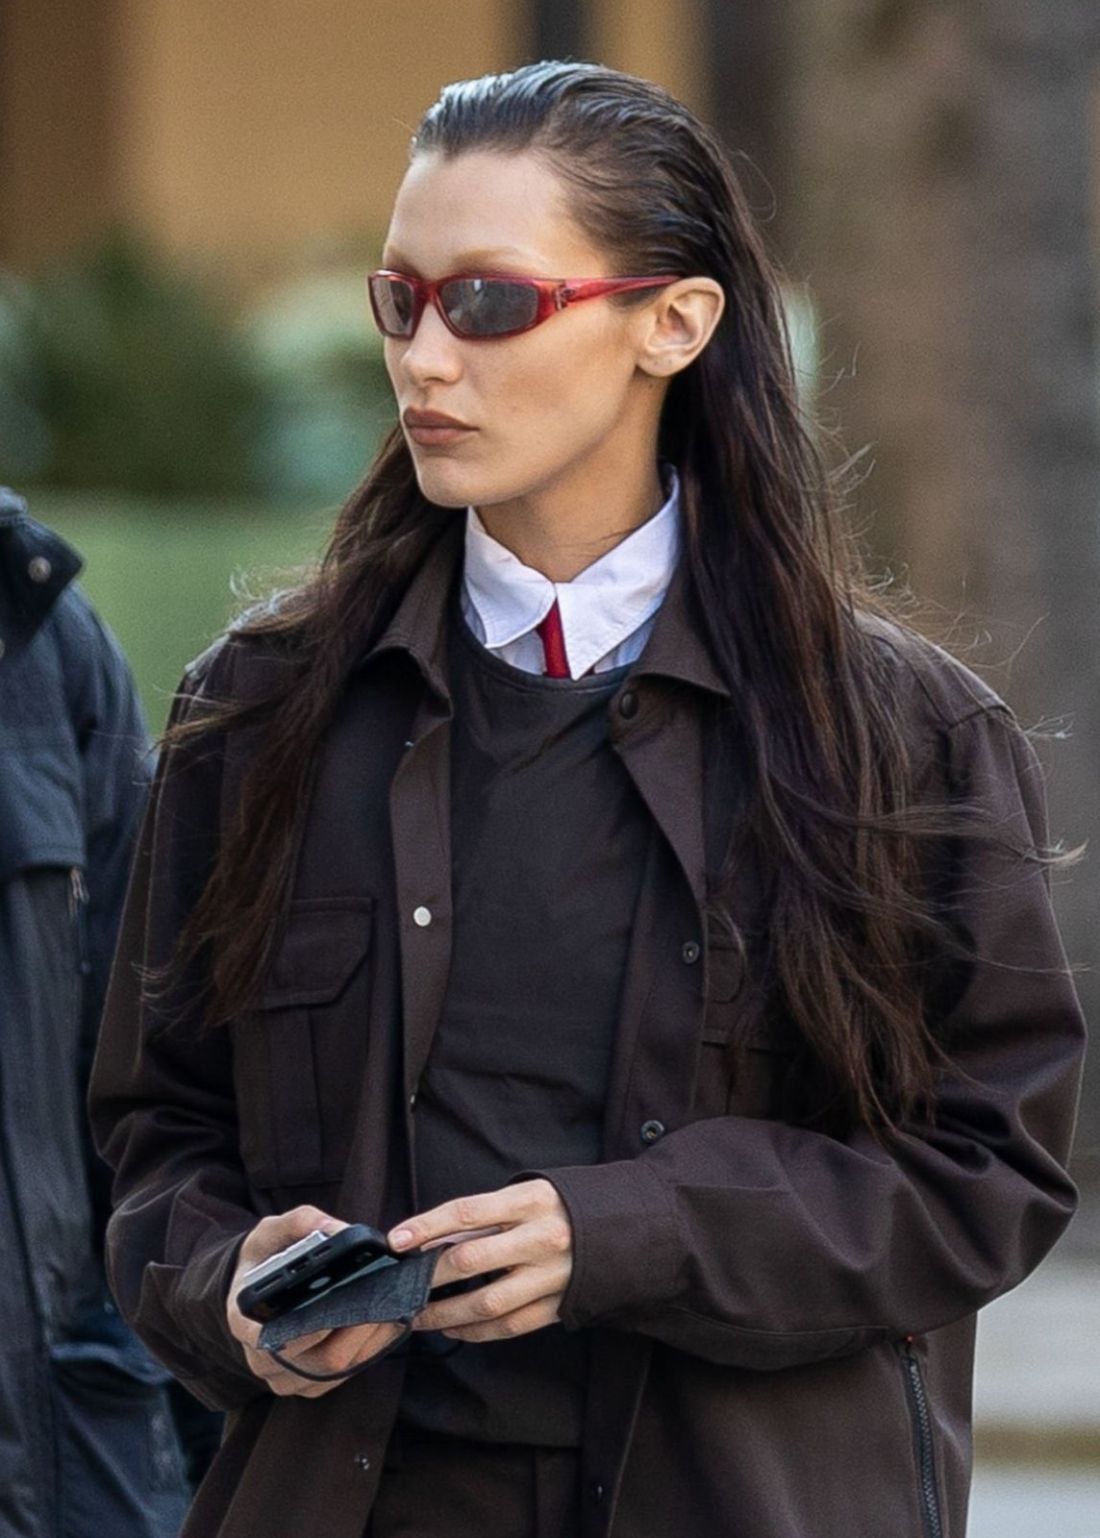 Bella Hadid in Paris wearing Brown Jacket, White Shirt with Red Tie, Sports Sunglasses Y2K Outfit